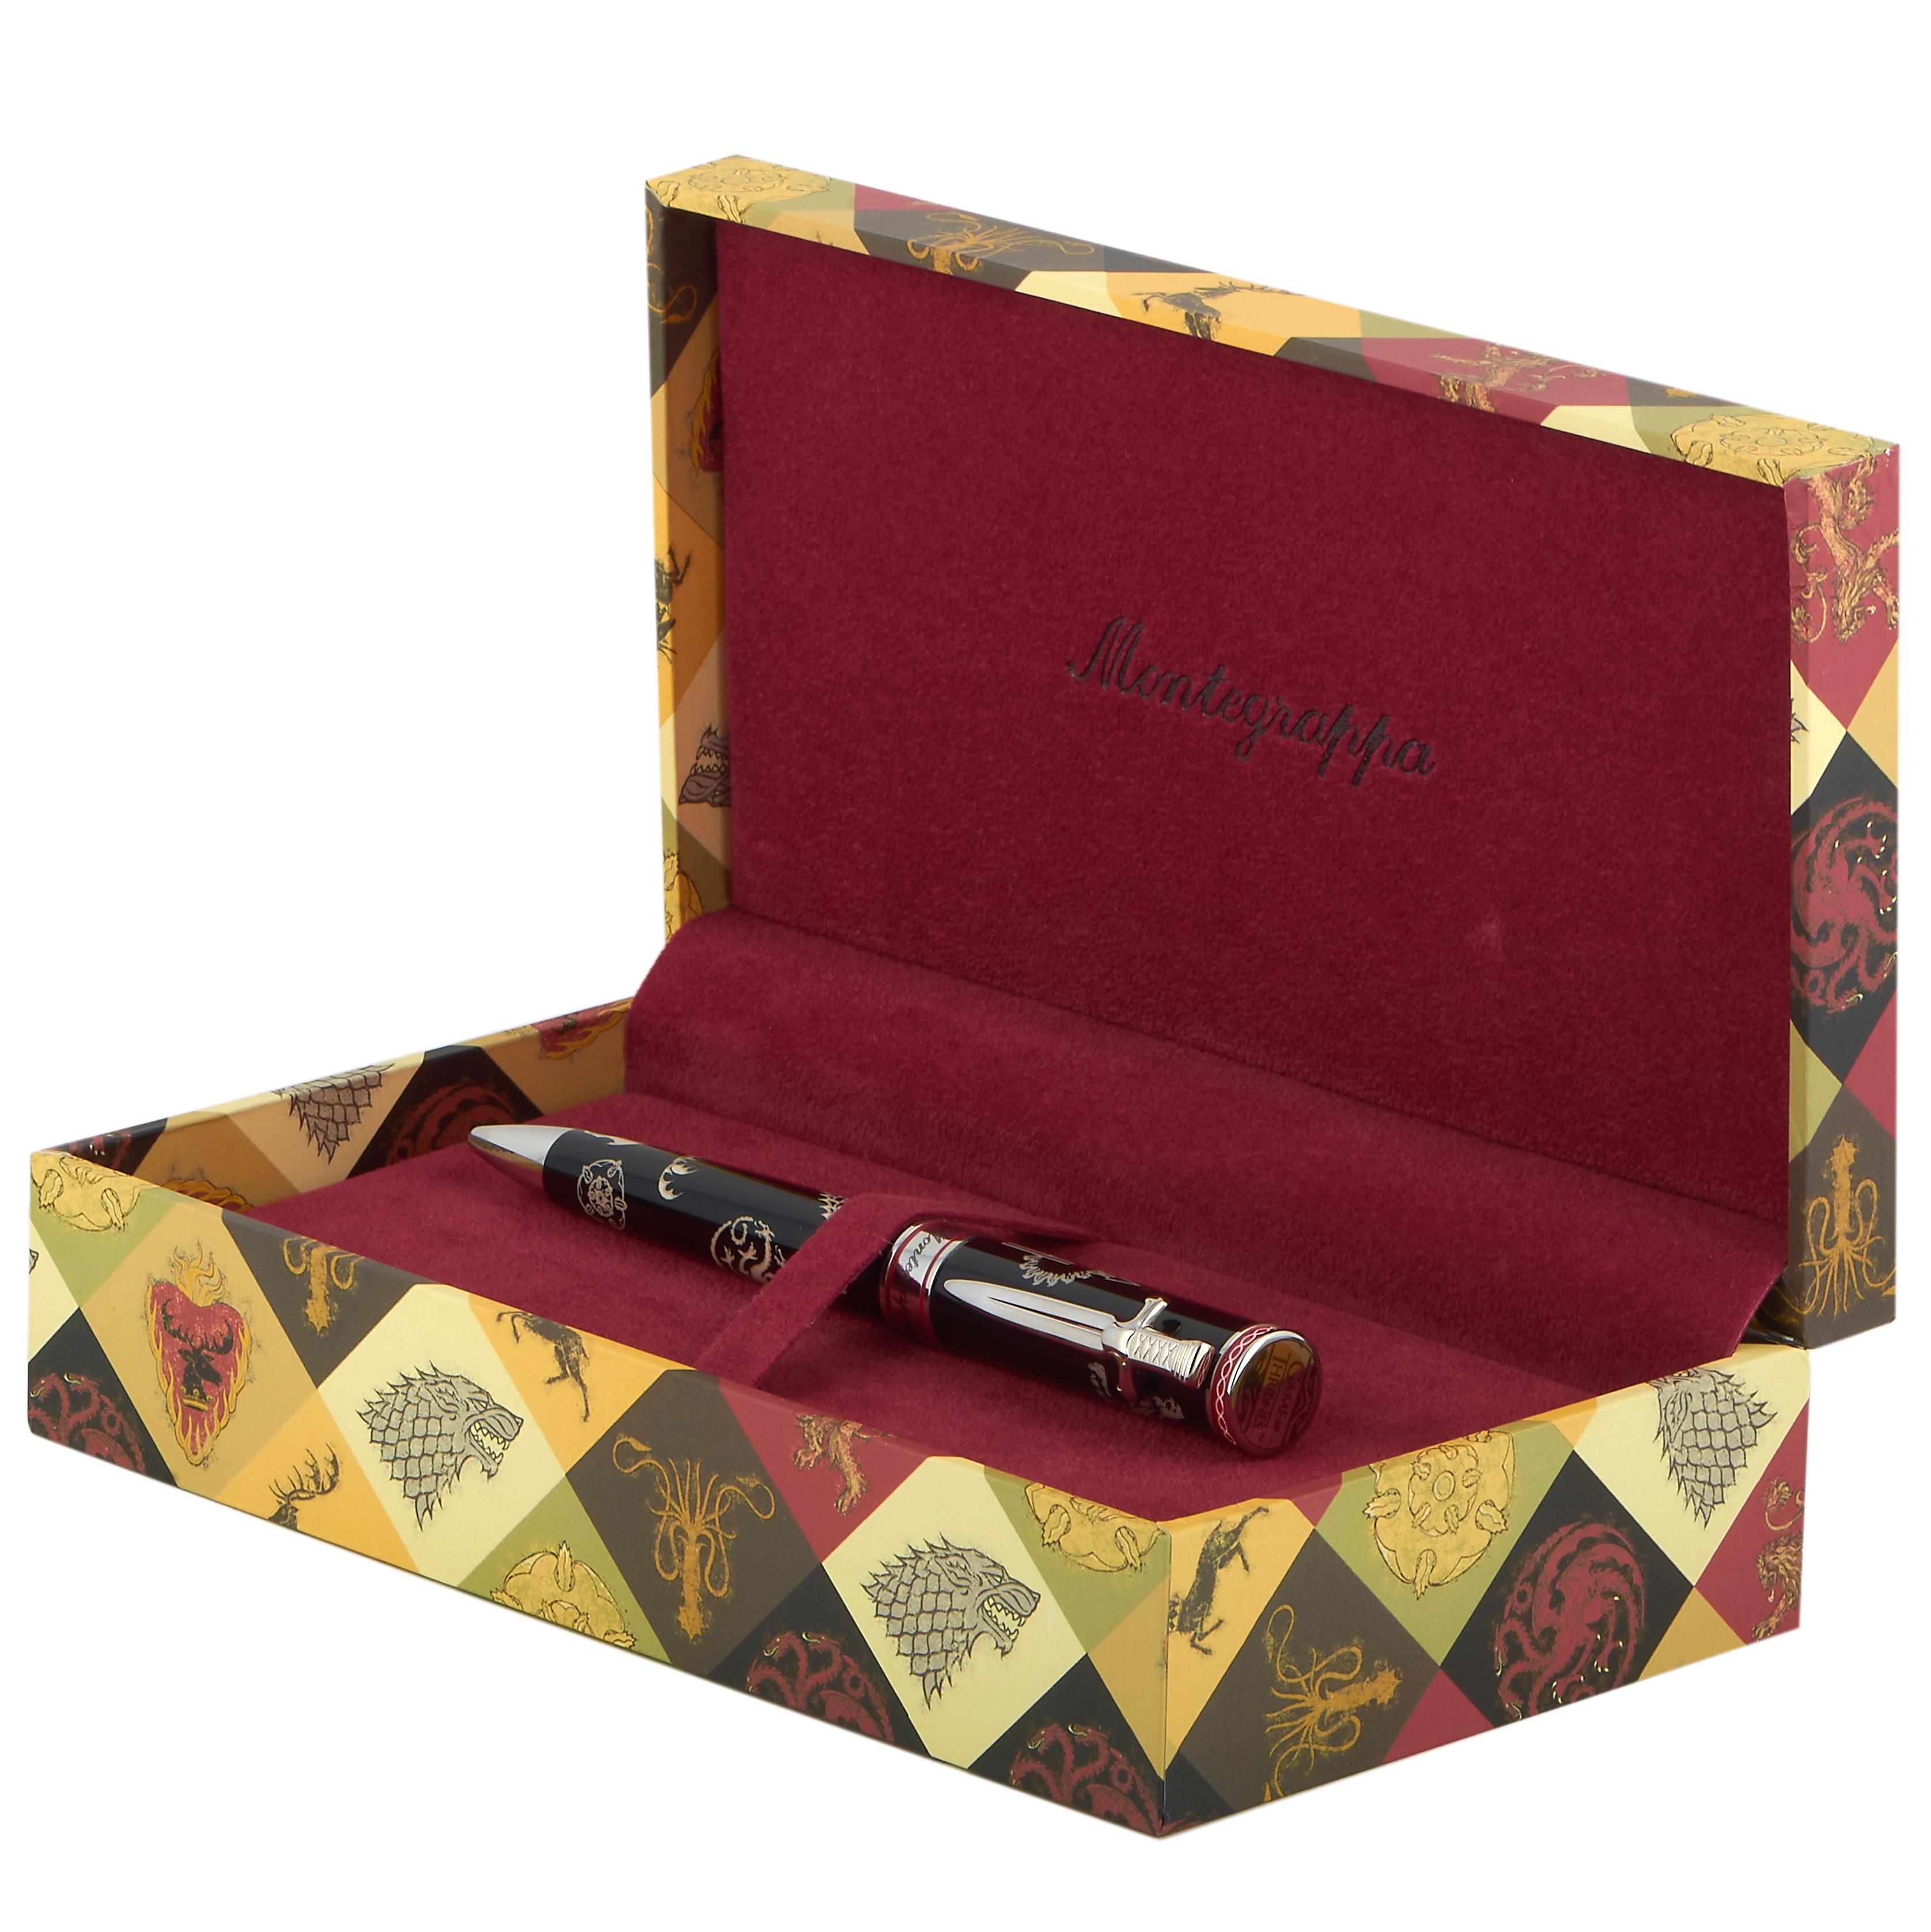 This Montegrappa rollerball pen is presented within the “Game of Thrones” collection and embellished with motifs from the fantasy continent of Westeros, topped off with a sword-shaped pocket clip. The pen is made out of resin and stainless steel.
 
